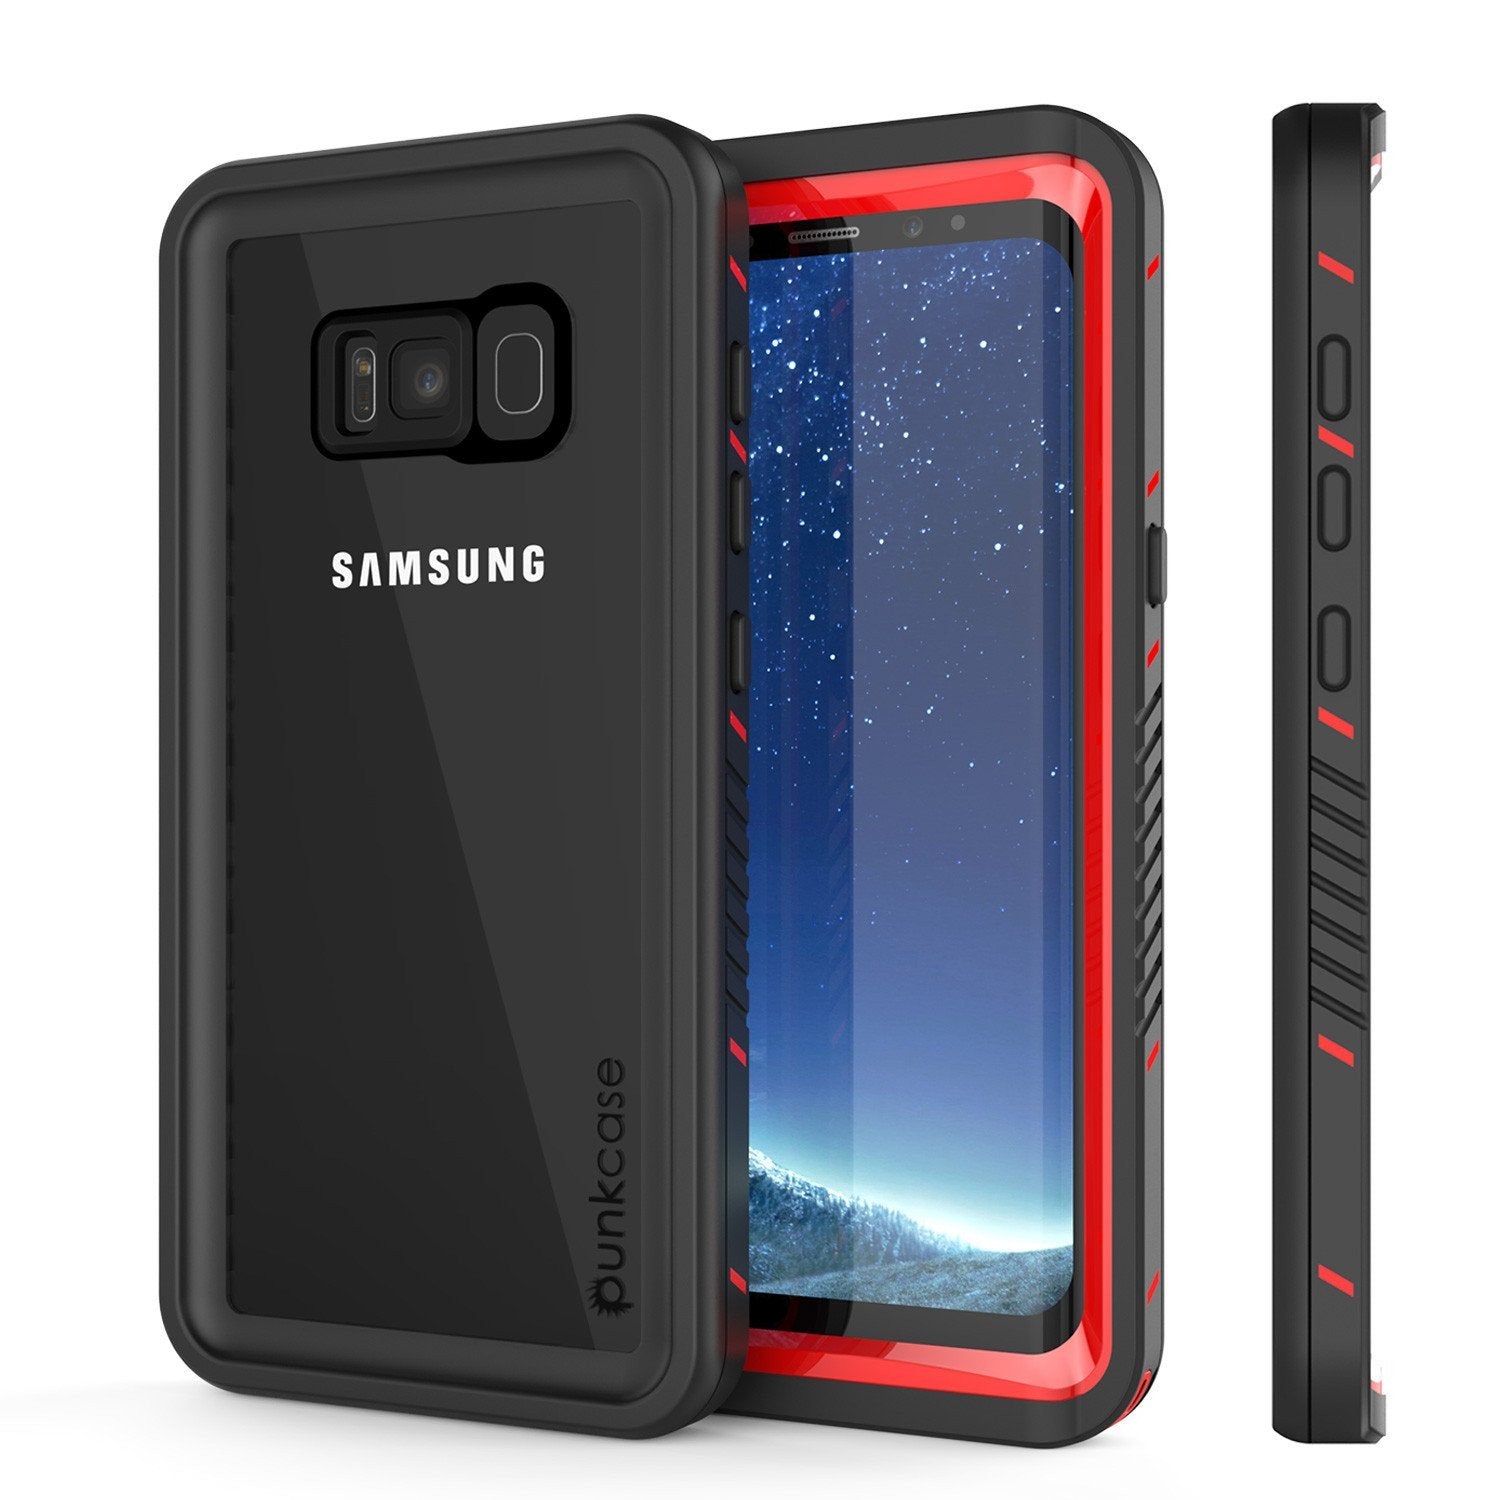 Galaxy S8 Case, Punkcase [Extreme Series] Armor Red Cover